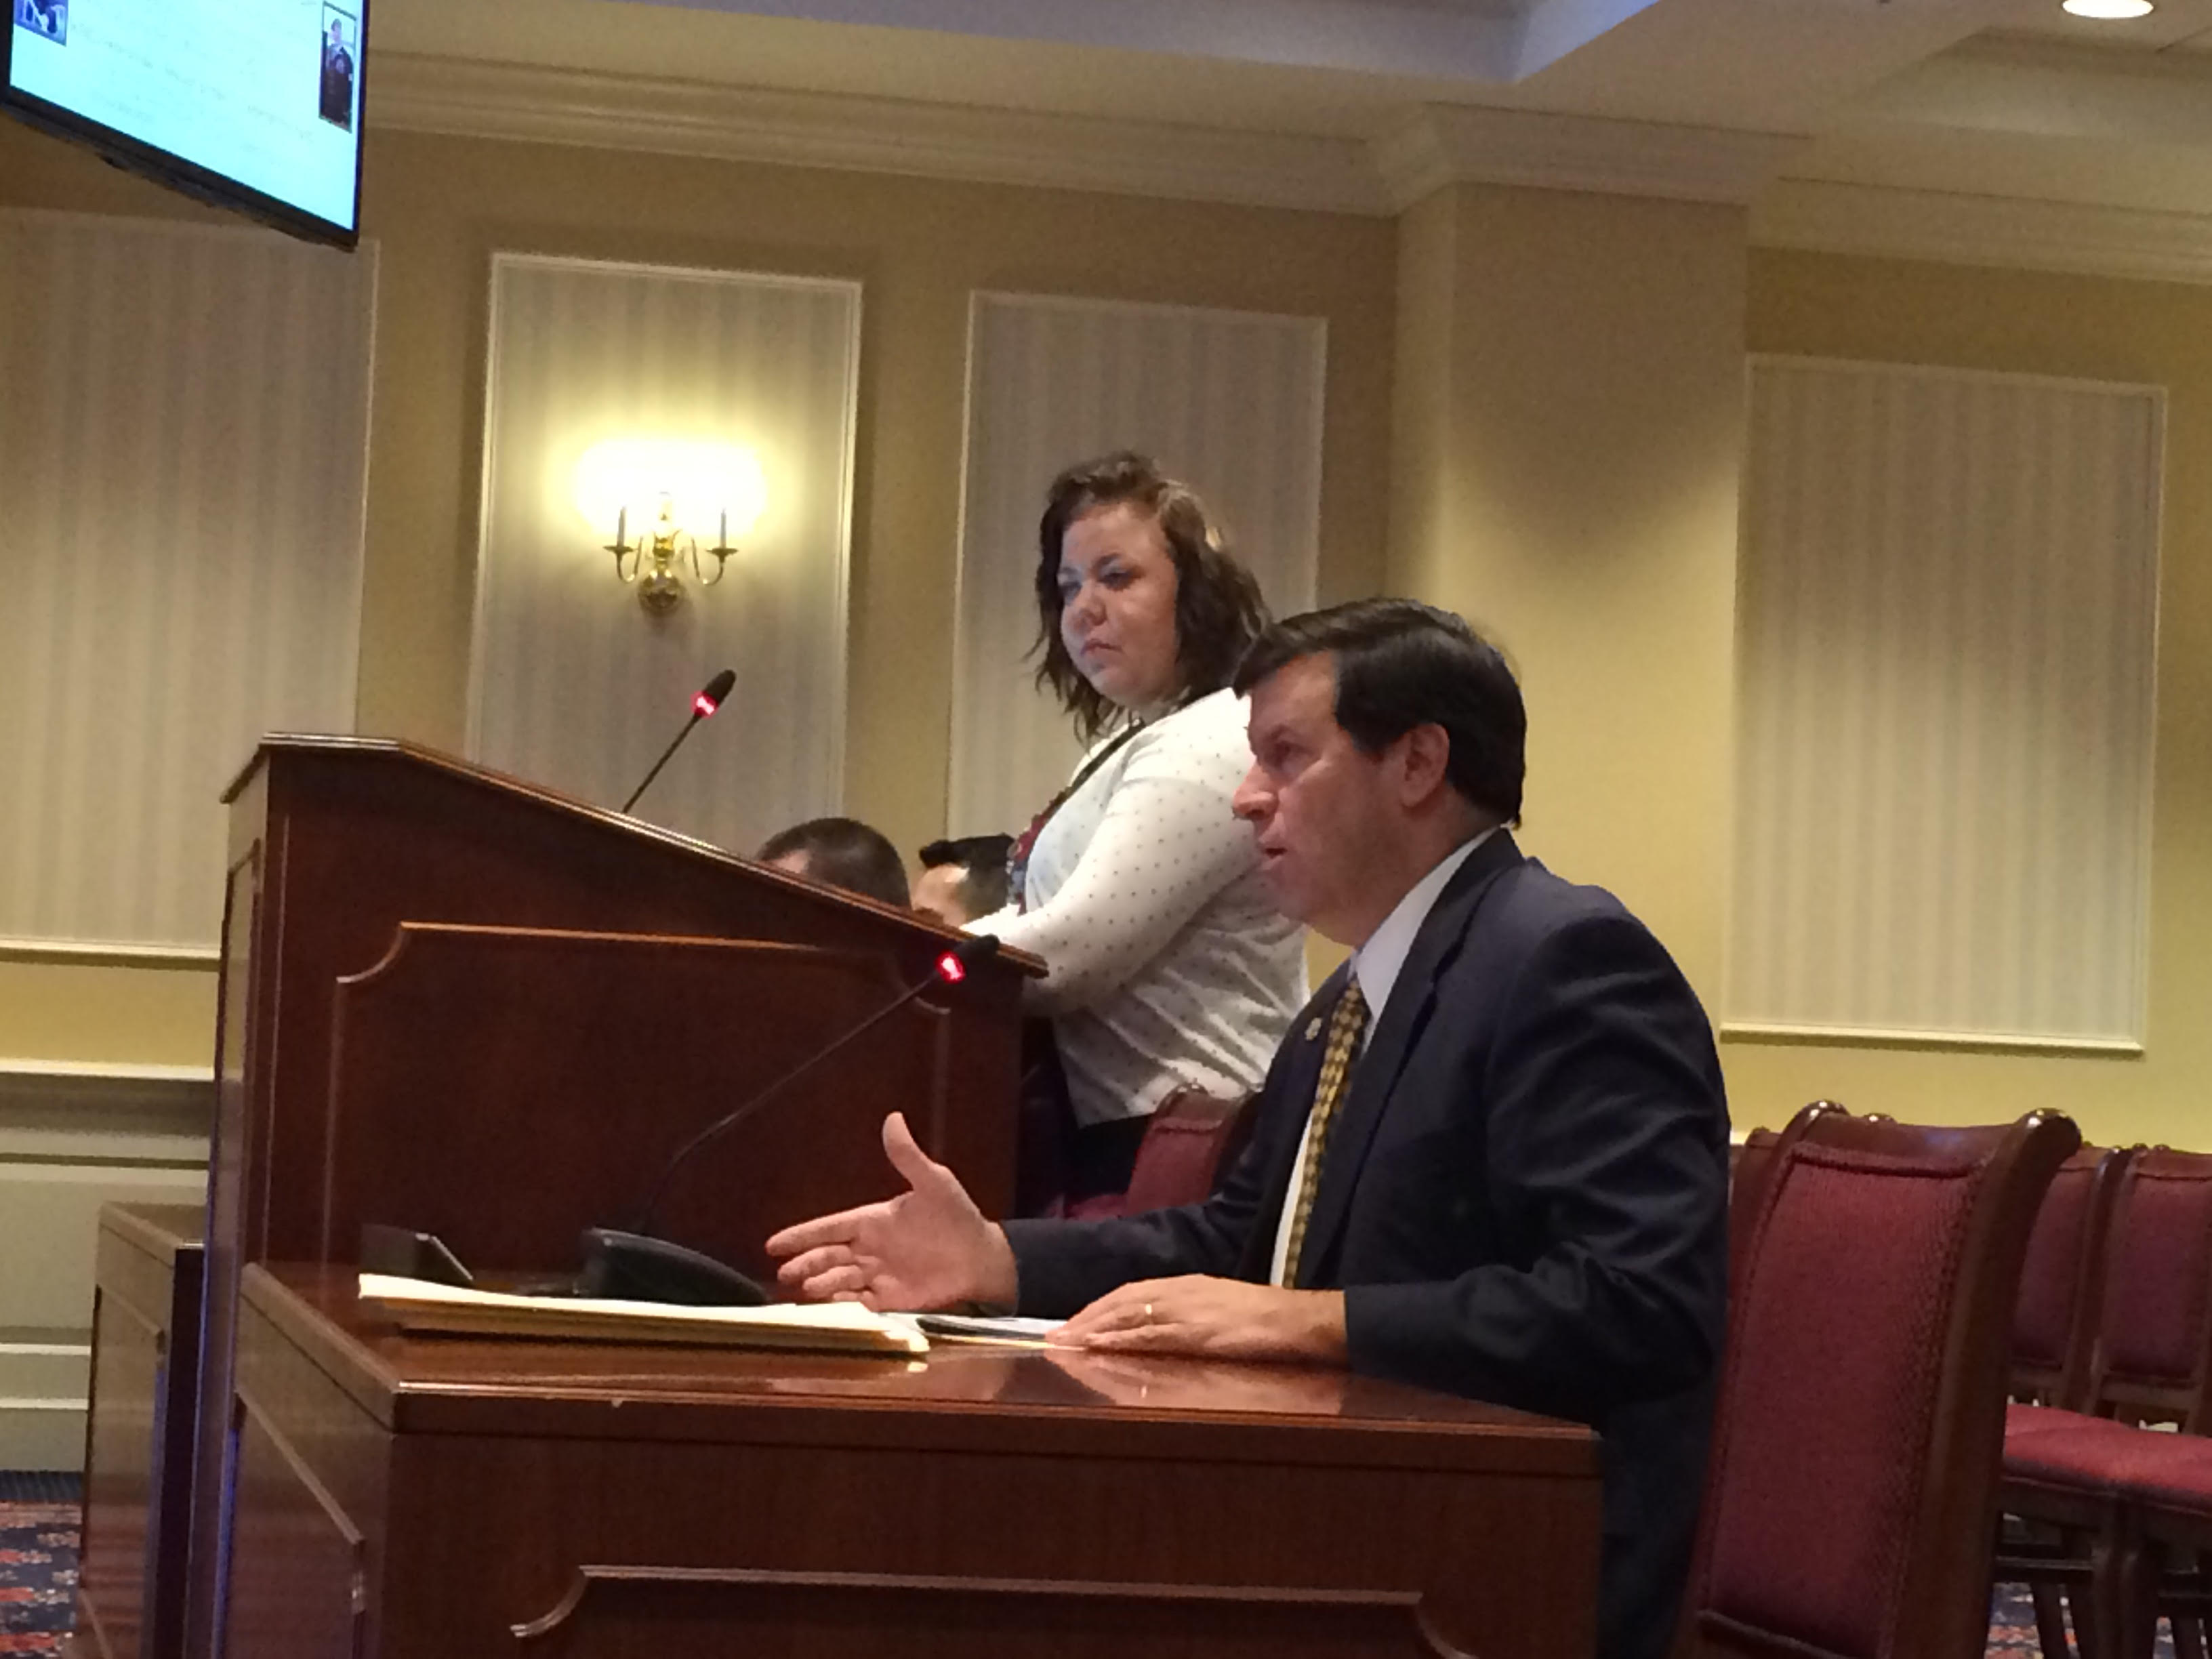 Sen. Bryan Simonaire, R-Anne Arundel, presents the Stolen Valor Act of 2016 at the Senate Judicial Proceedings Committee meeting in Annapolis, Maryland, on January 19, 2016.